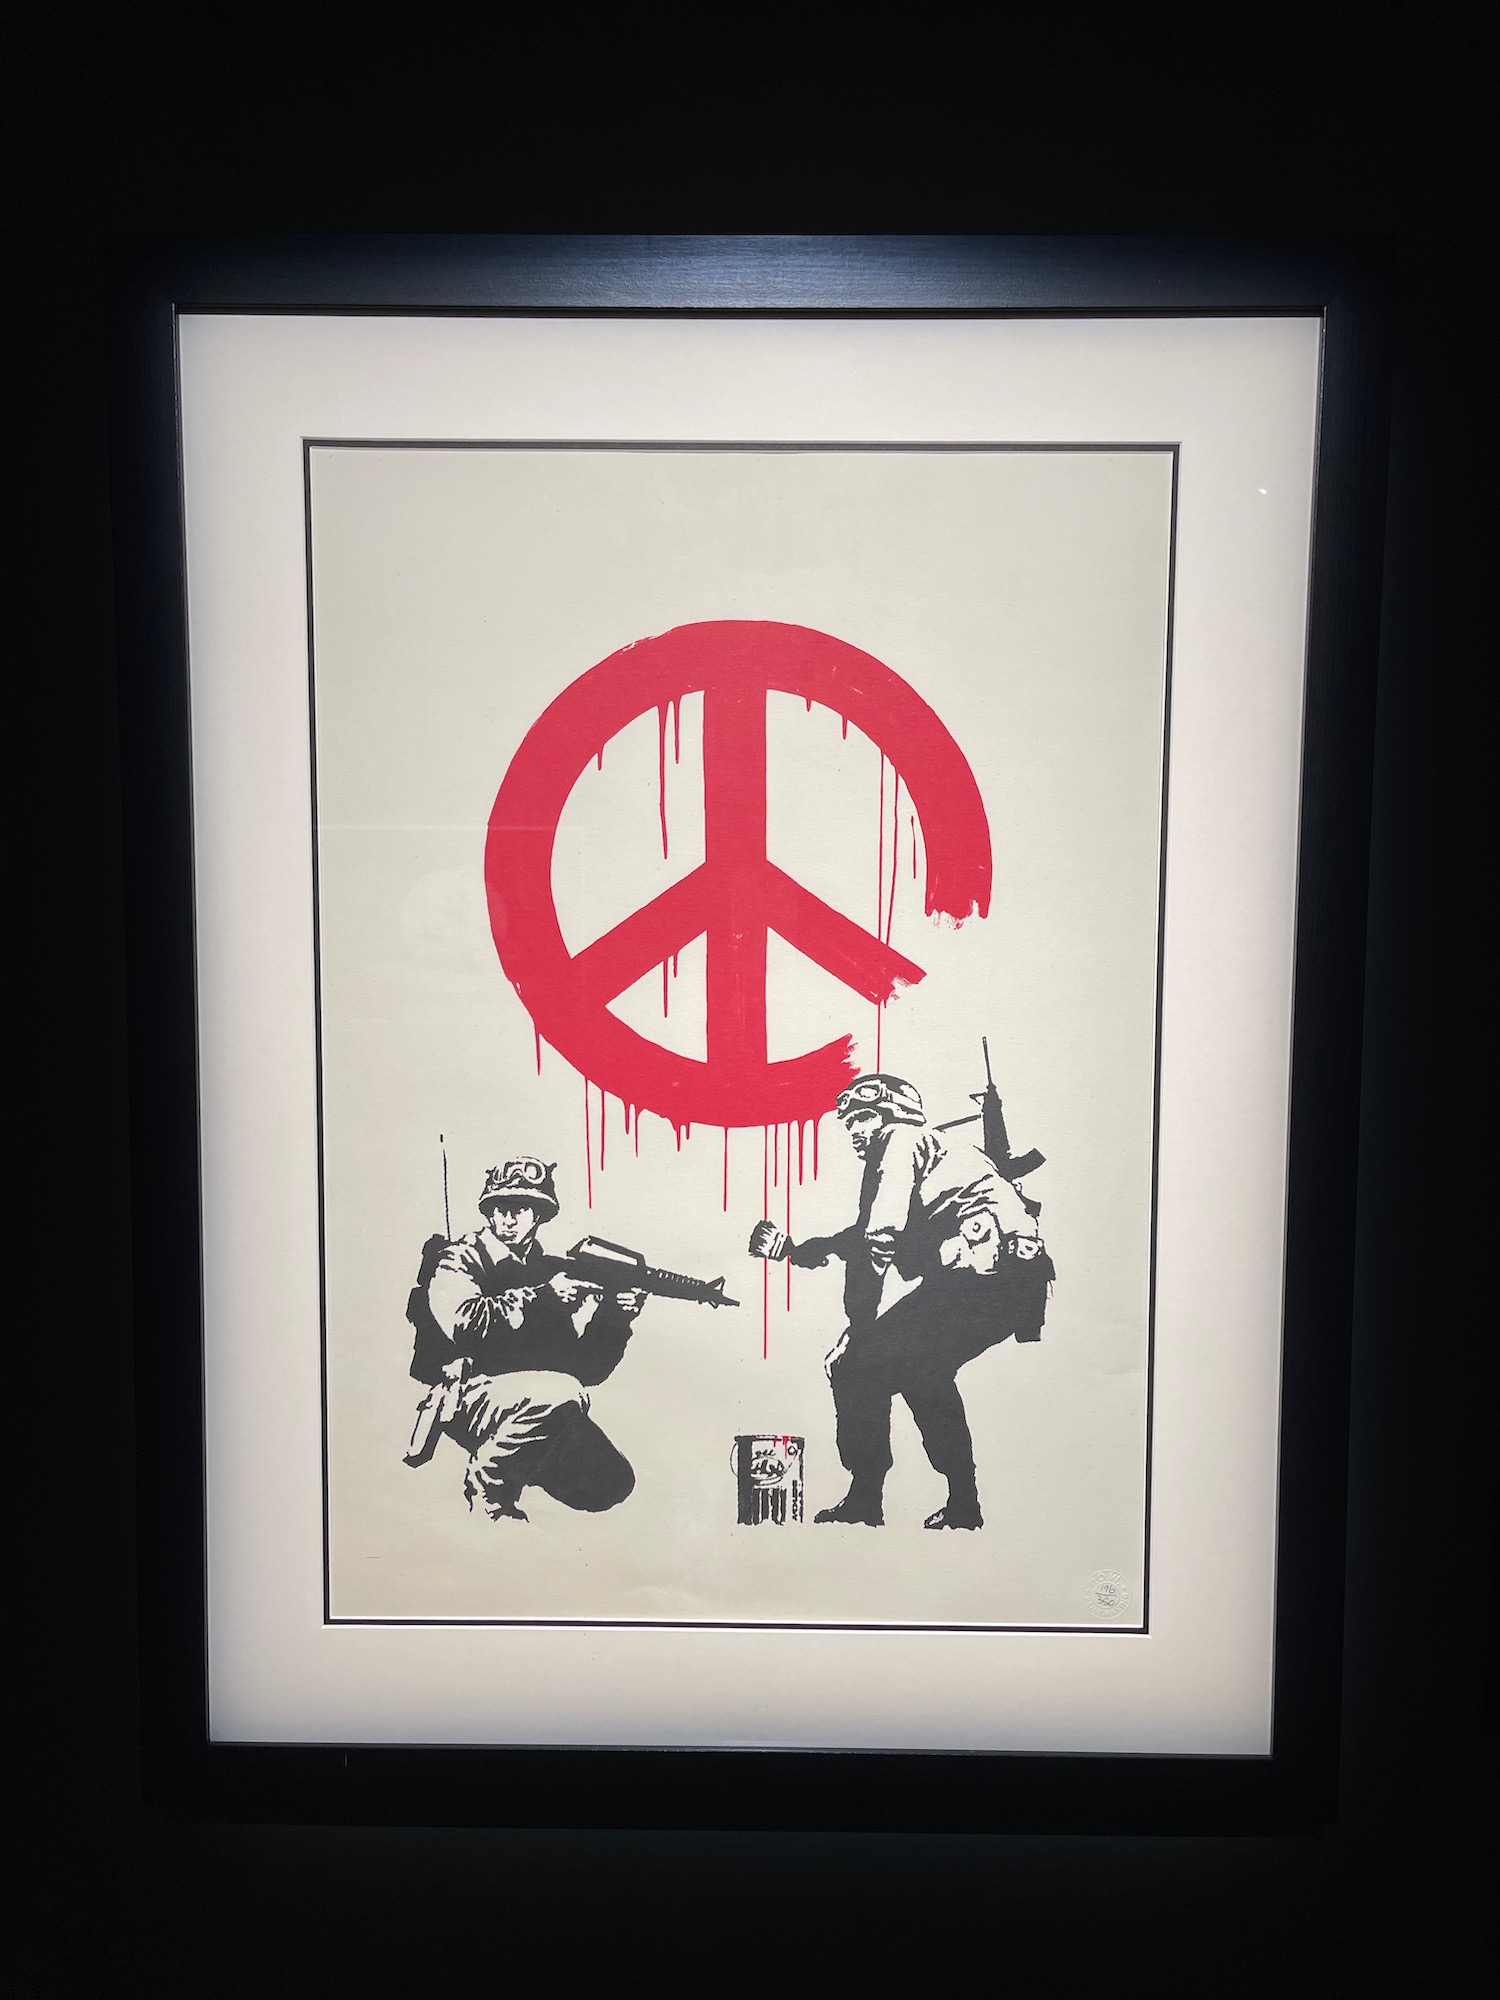 a framed picture of a peace sign and soldiers